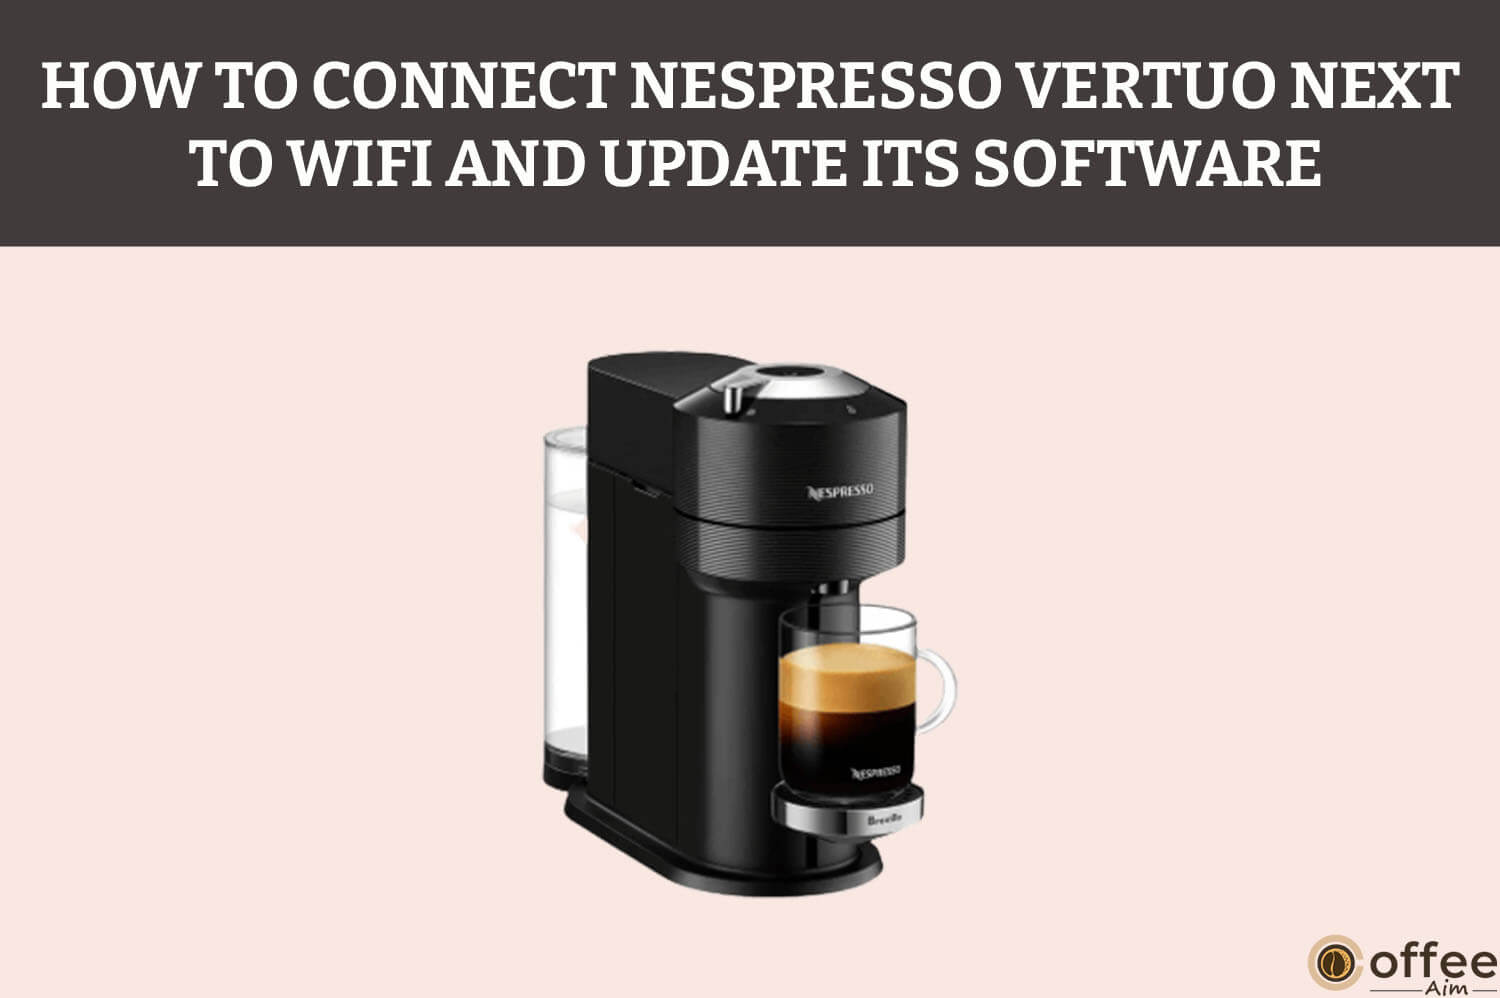 Featured image for the article "How To Connect Nespresso Vertuo Next To Wifi And Update Its Software"